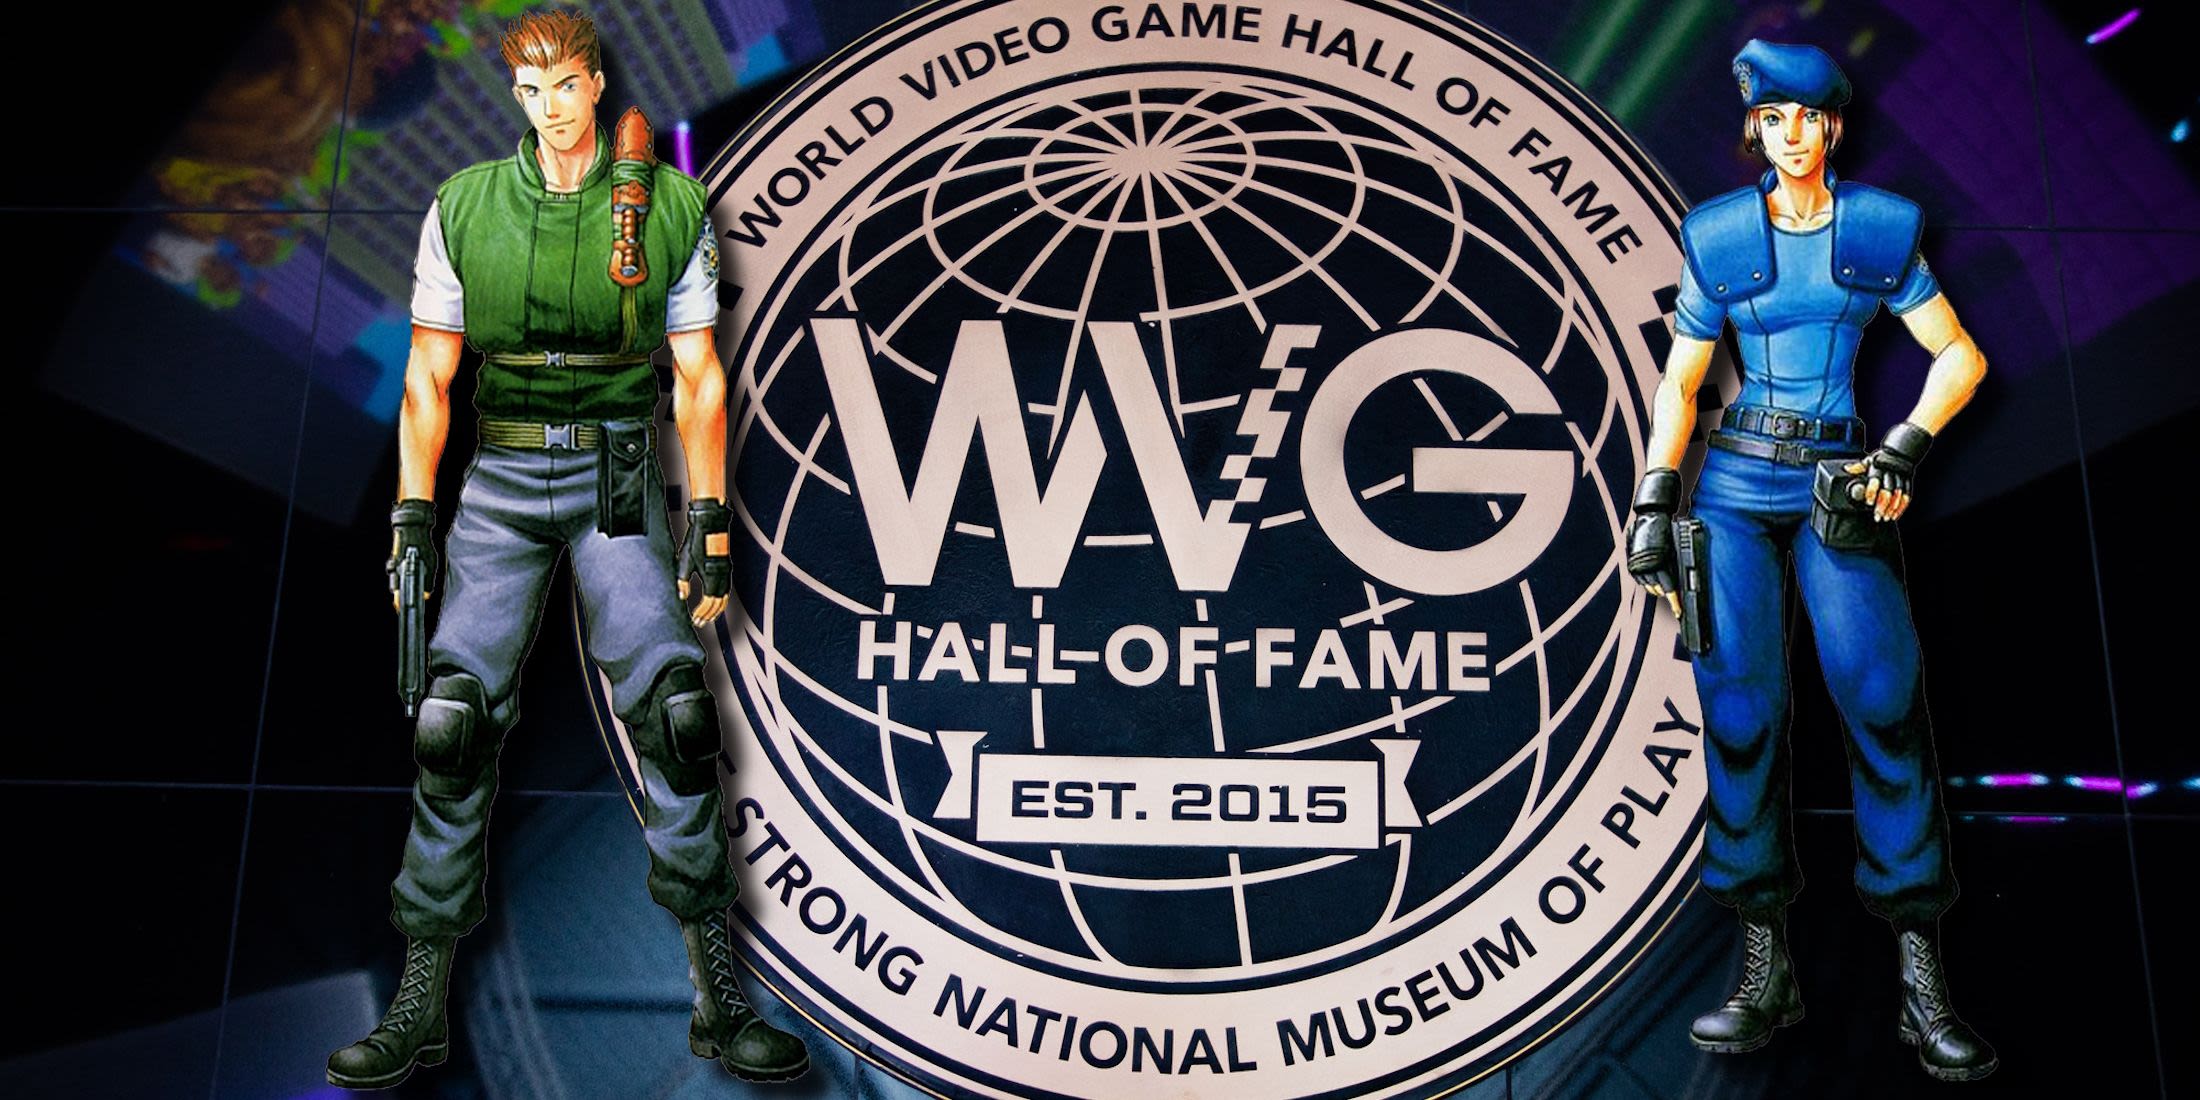 Video Game Hall of Fame Inducts Resident Evil and Other Legendary Games